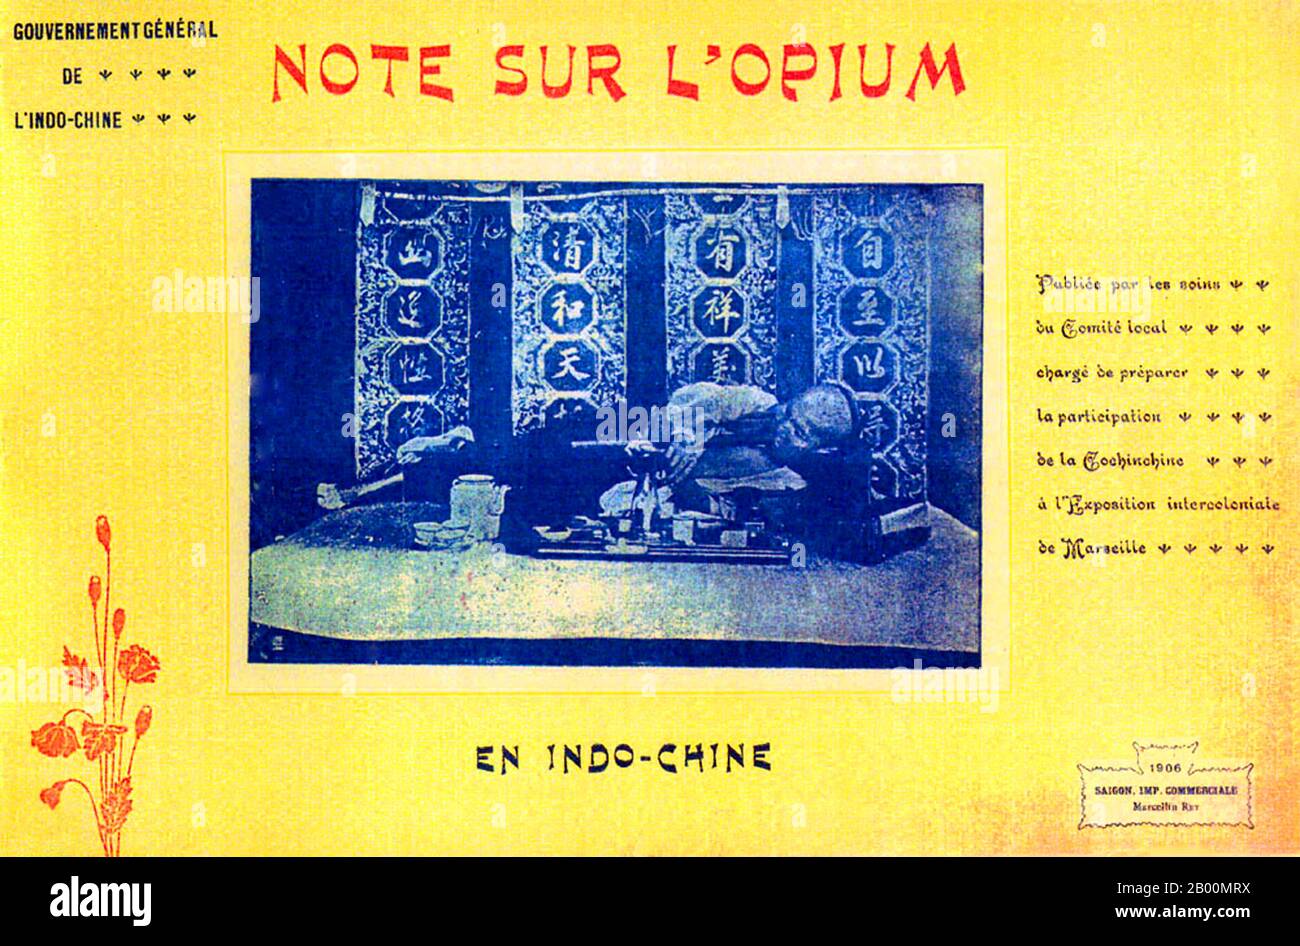 Vietnam: A Note on Opium in Indochina, Colonial pamphlet, Saigon, 1906.  The French established an opium franchise to put their new colony on a paying basis only six months after they annexed Saigon in 1862. Opium was imported from India, taxed at 10 percent of value, and sold by licensed Chinese merchants to all comers. Opium became an extremely lucrative source of income, and this successful experiment was repeated as the French acquired other areas in Indochina. Shortly after the French established a protectorate over Cambodia (1863) and central Vietnam (1883), and annexed Tonkin (1884). Stock Photo